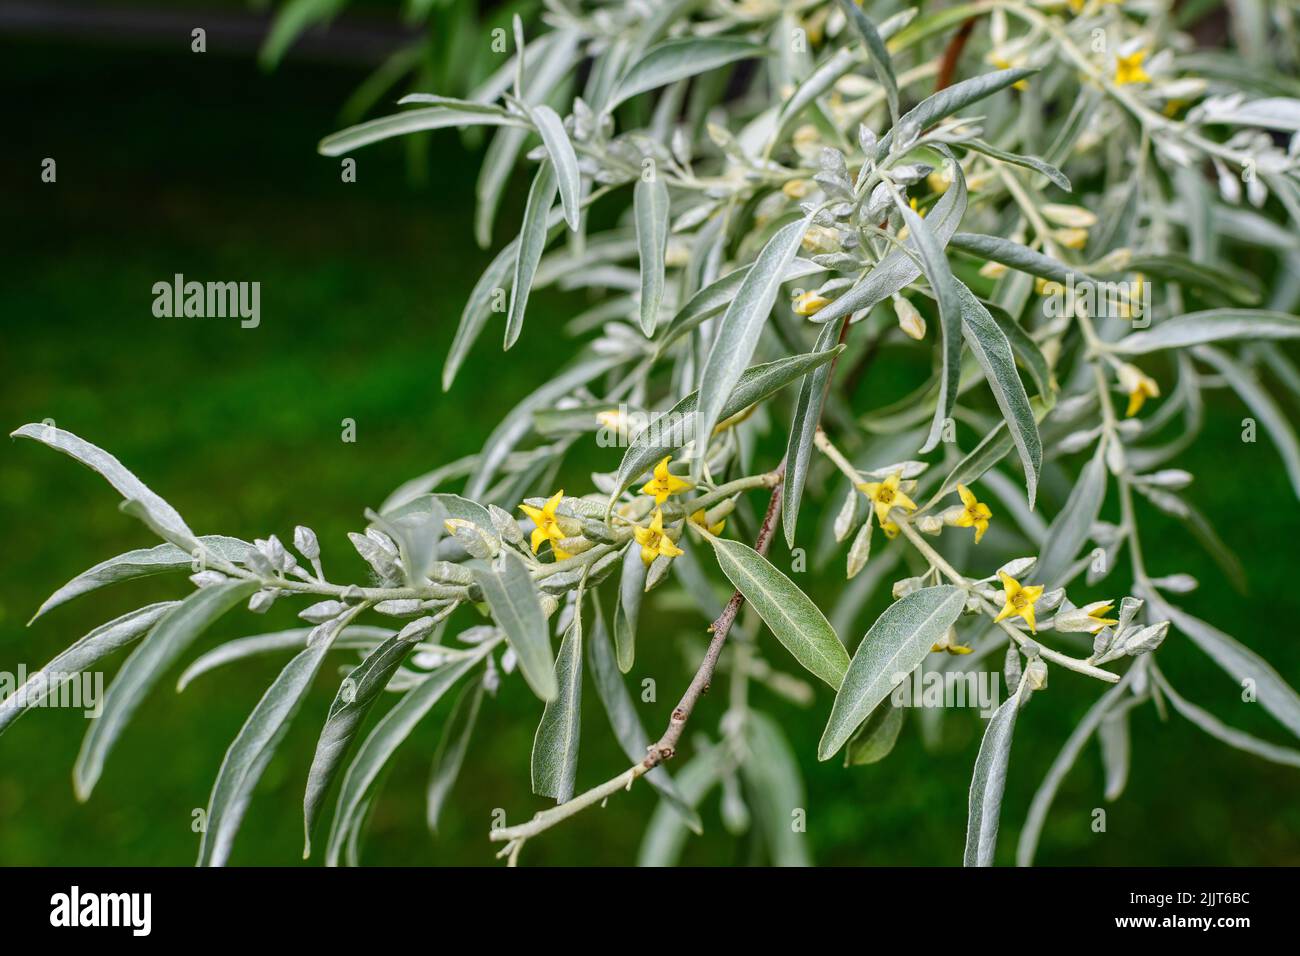 Silver leaves and small yellow flowers of Elaeagnus angustifolia plant, commonly called wild Russian or Persian olive, silver berry, oleaster, on bran Stock Photo